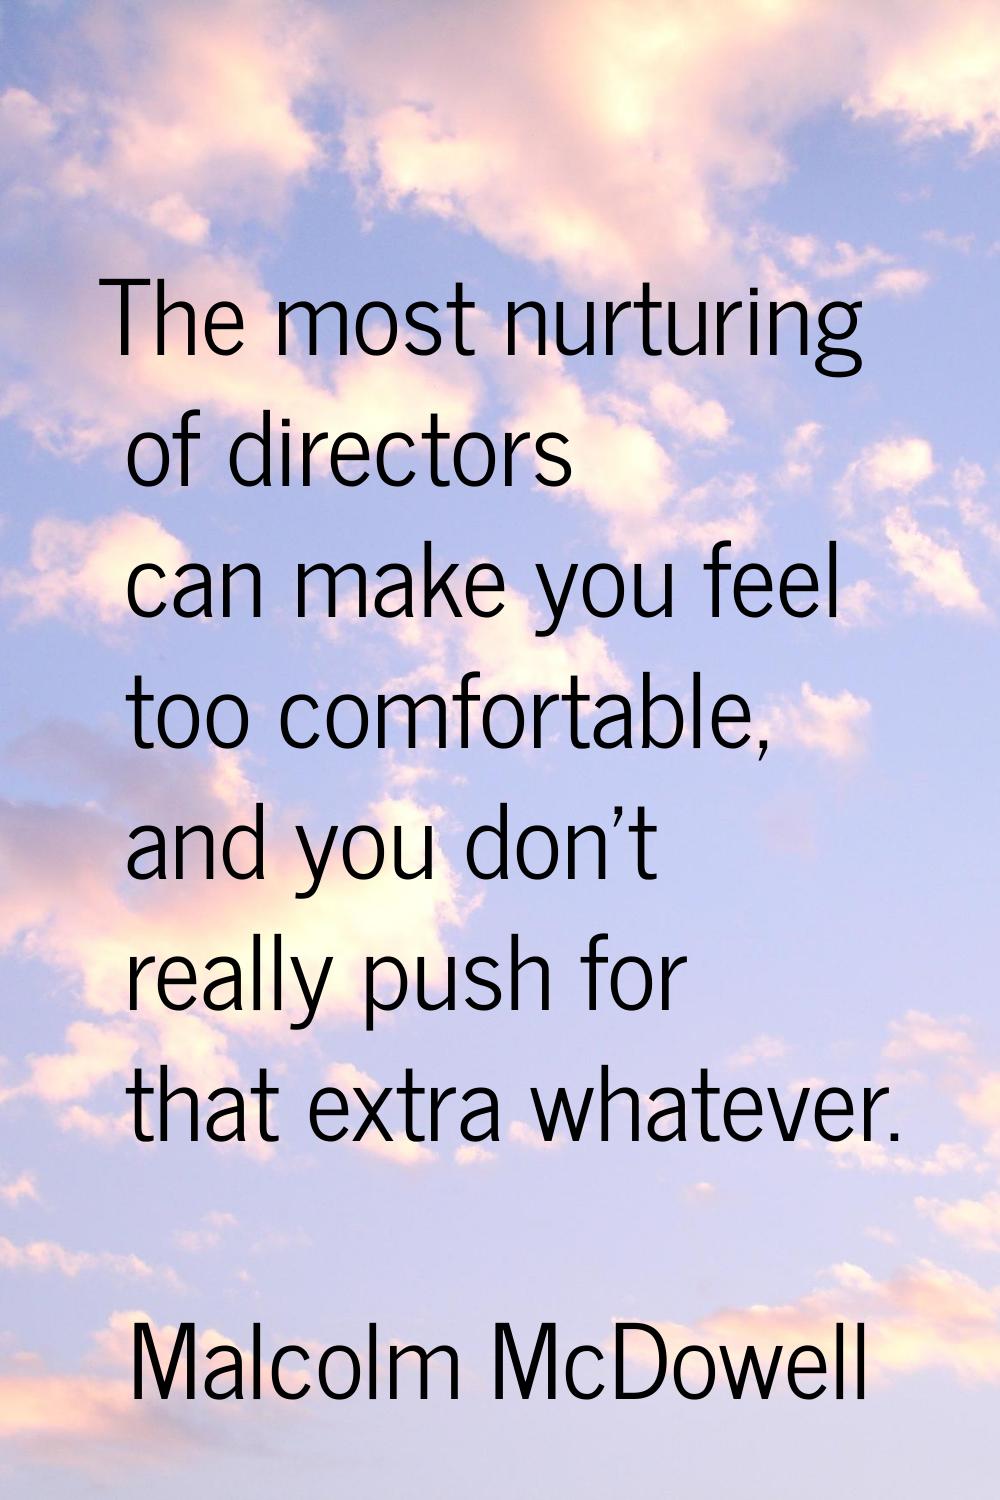 The most nurturing of directors can make you feel too comfortable, and you don't really push for th